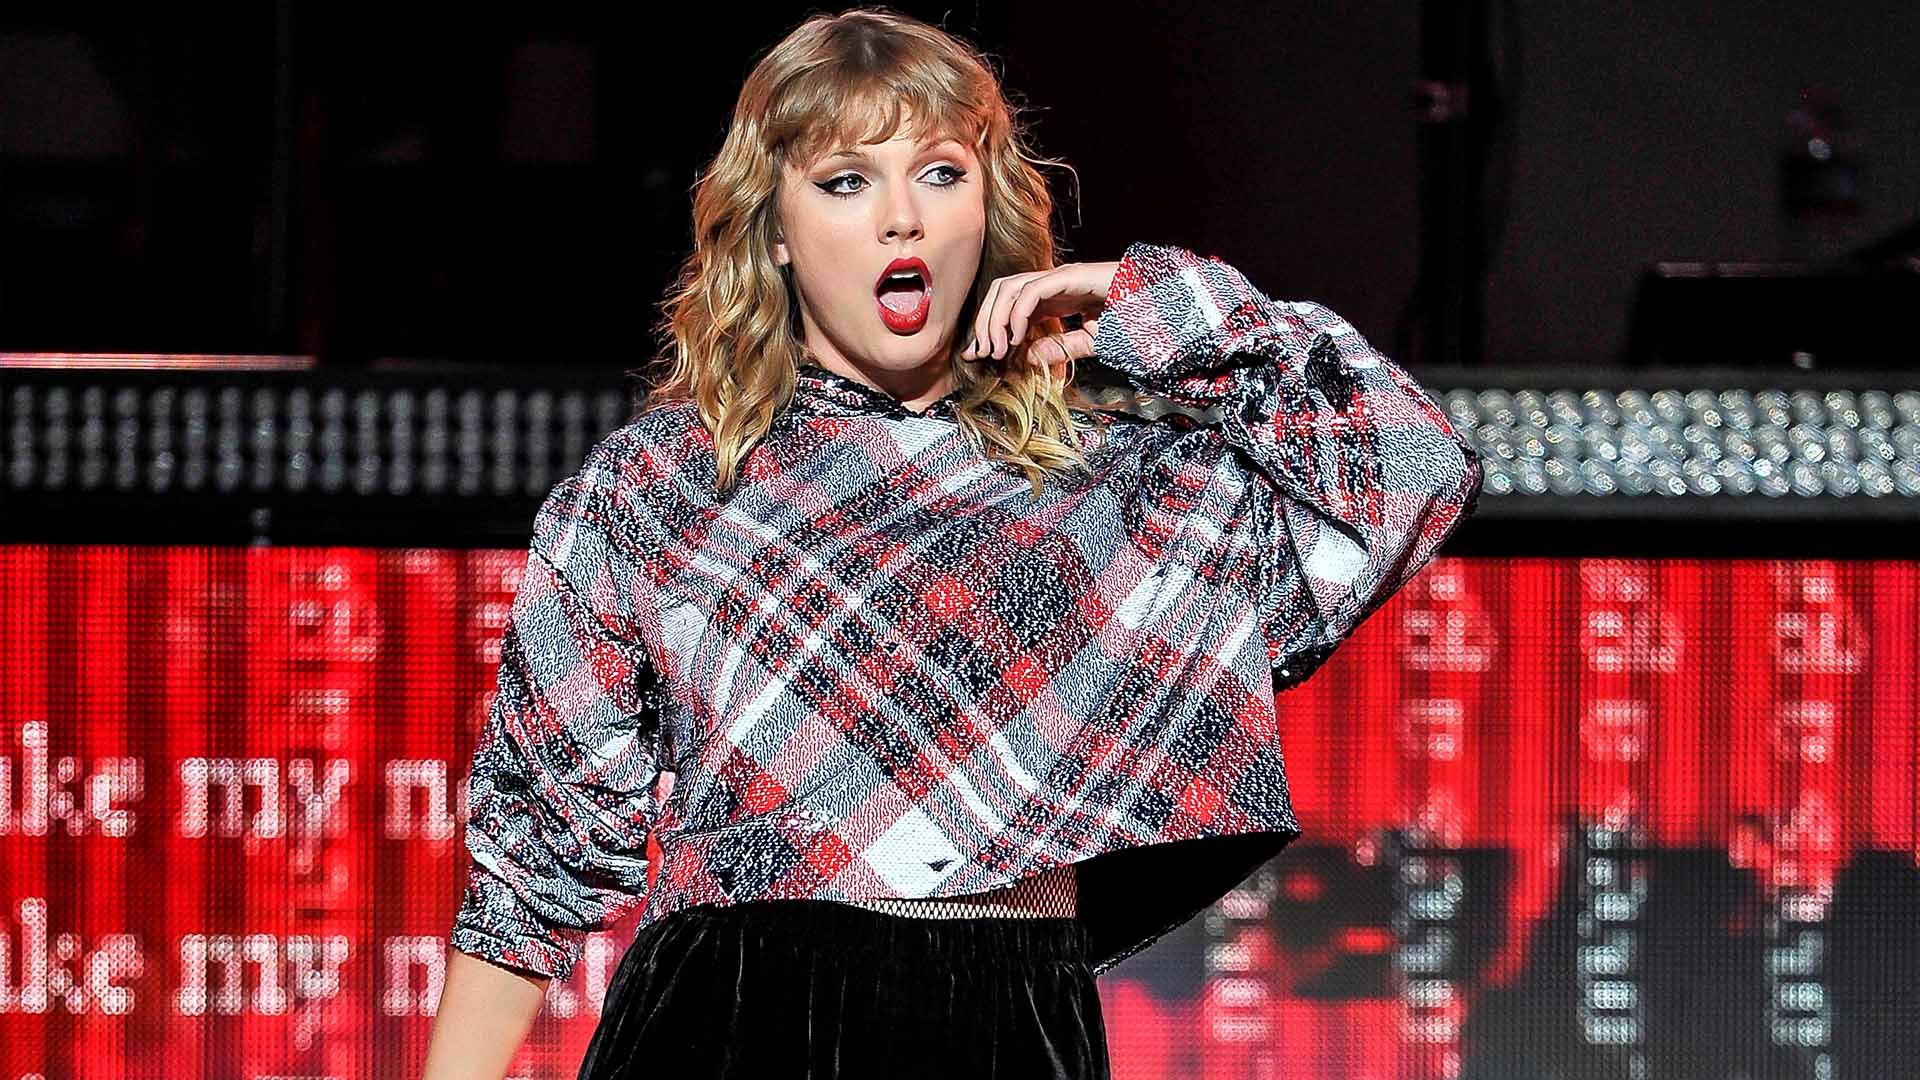 In Honor of Taylor Swift’s Birthday We’re Showcasing Her Best Moments of 2017!